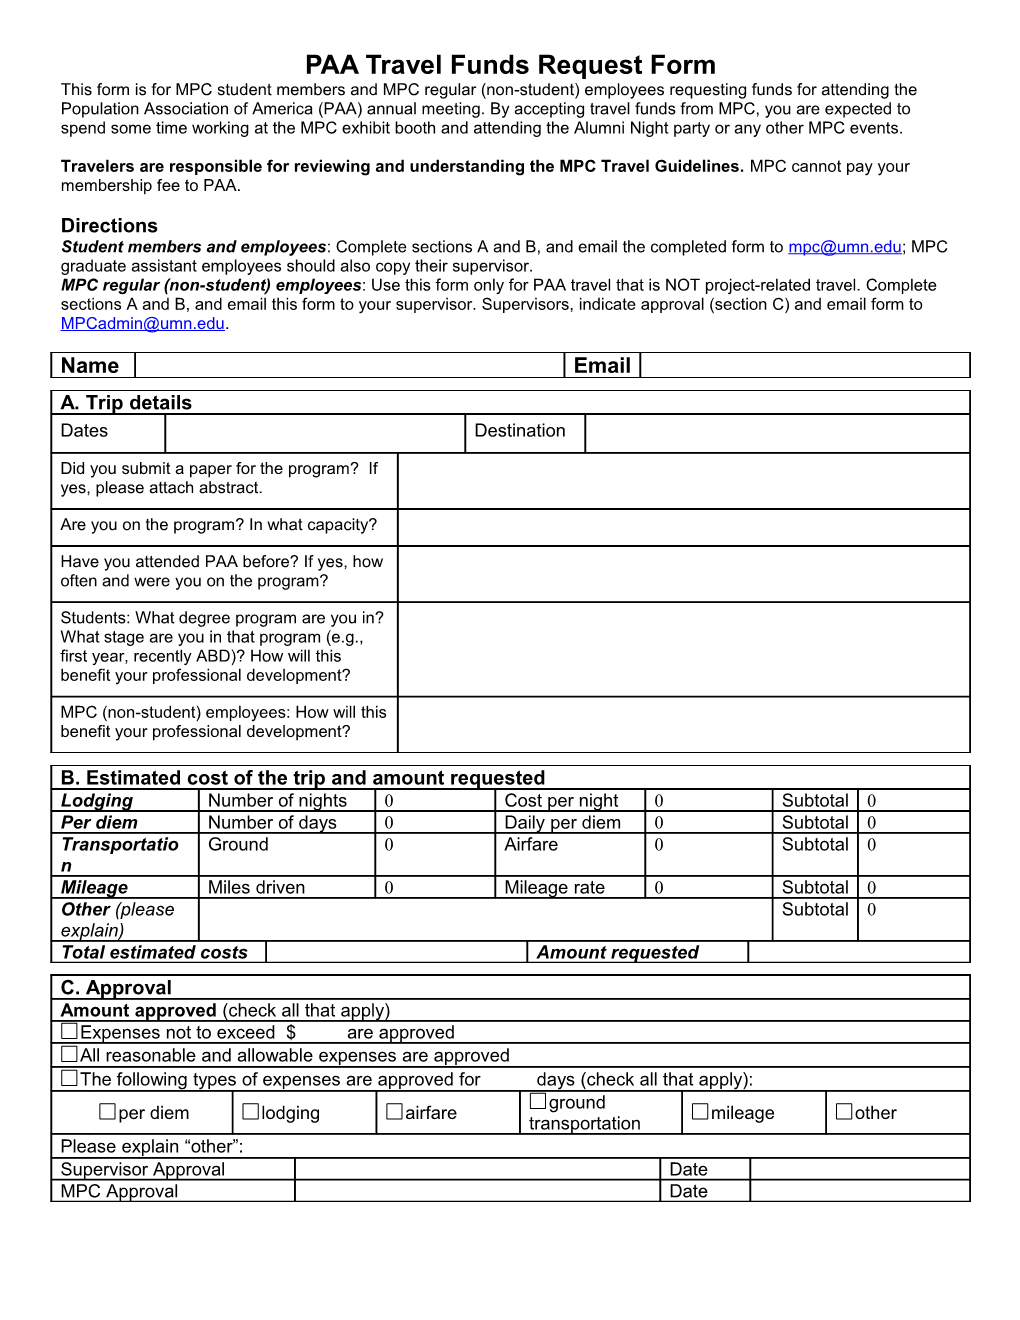 MPC Travel Funds Request Form